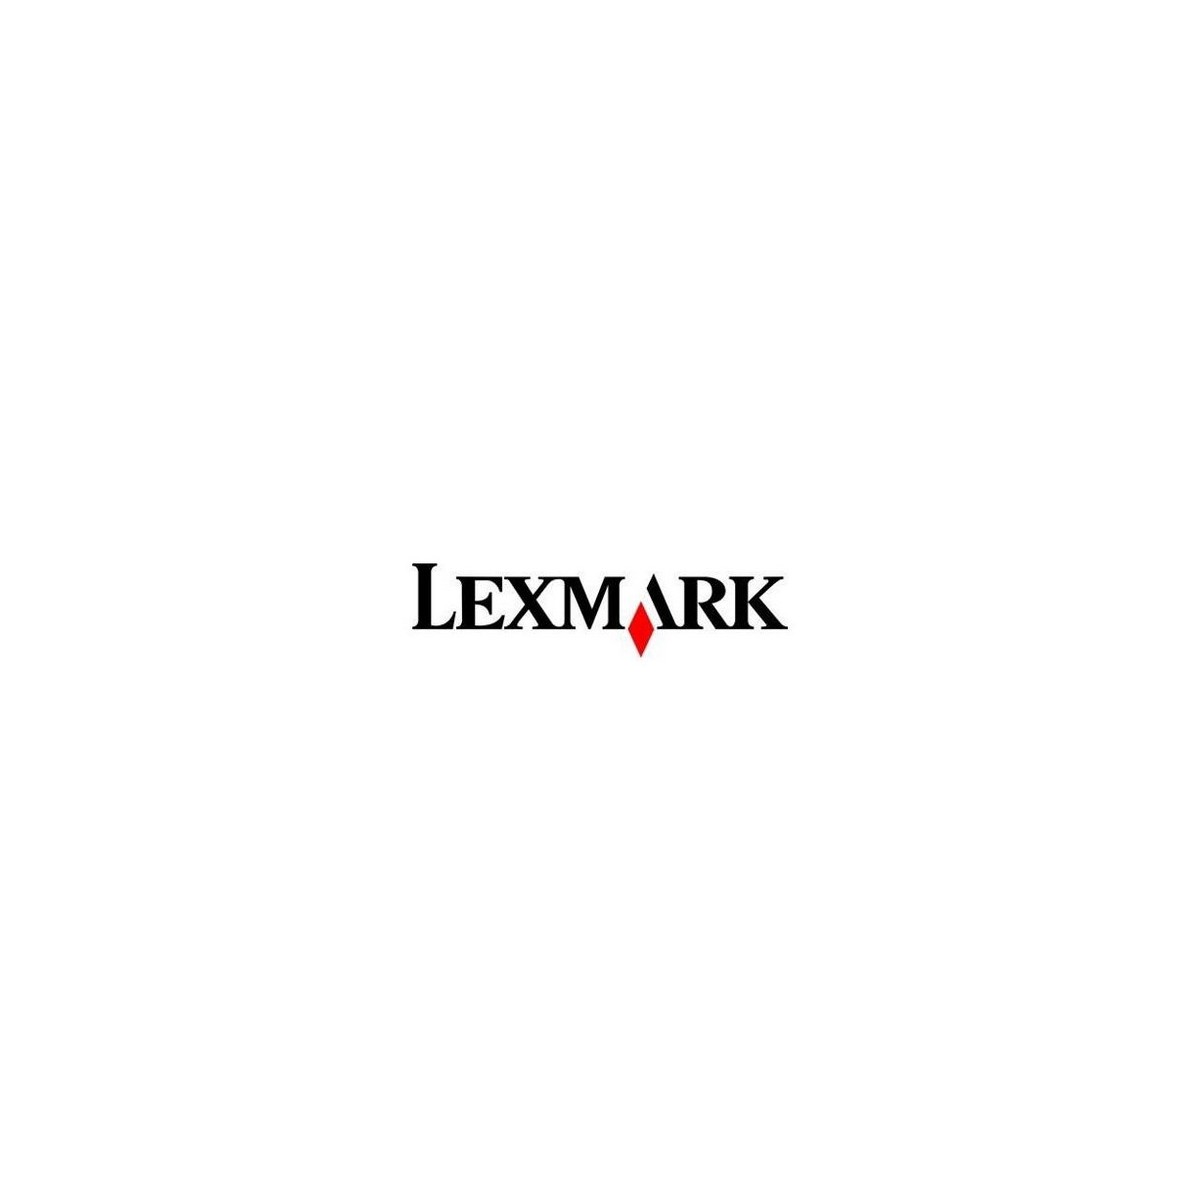 Lexmark 2y - NBD - C748 - 2 year(s) - On-site - Next Business Day (NBD)